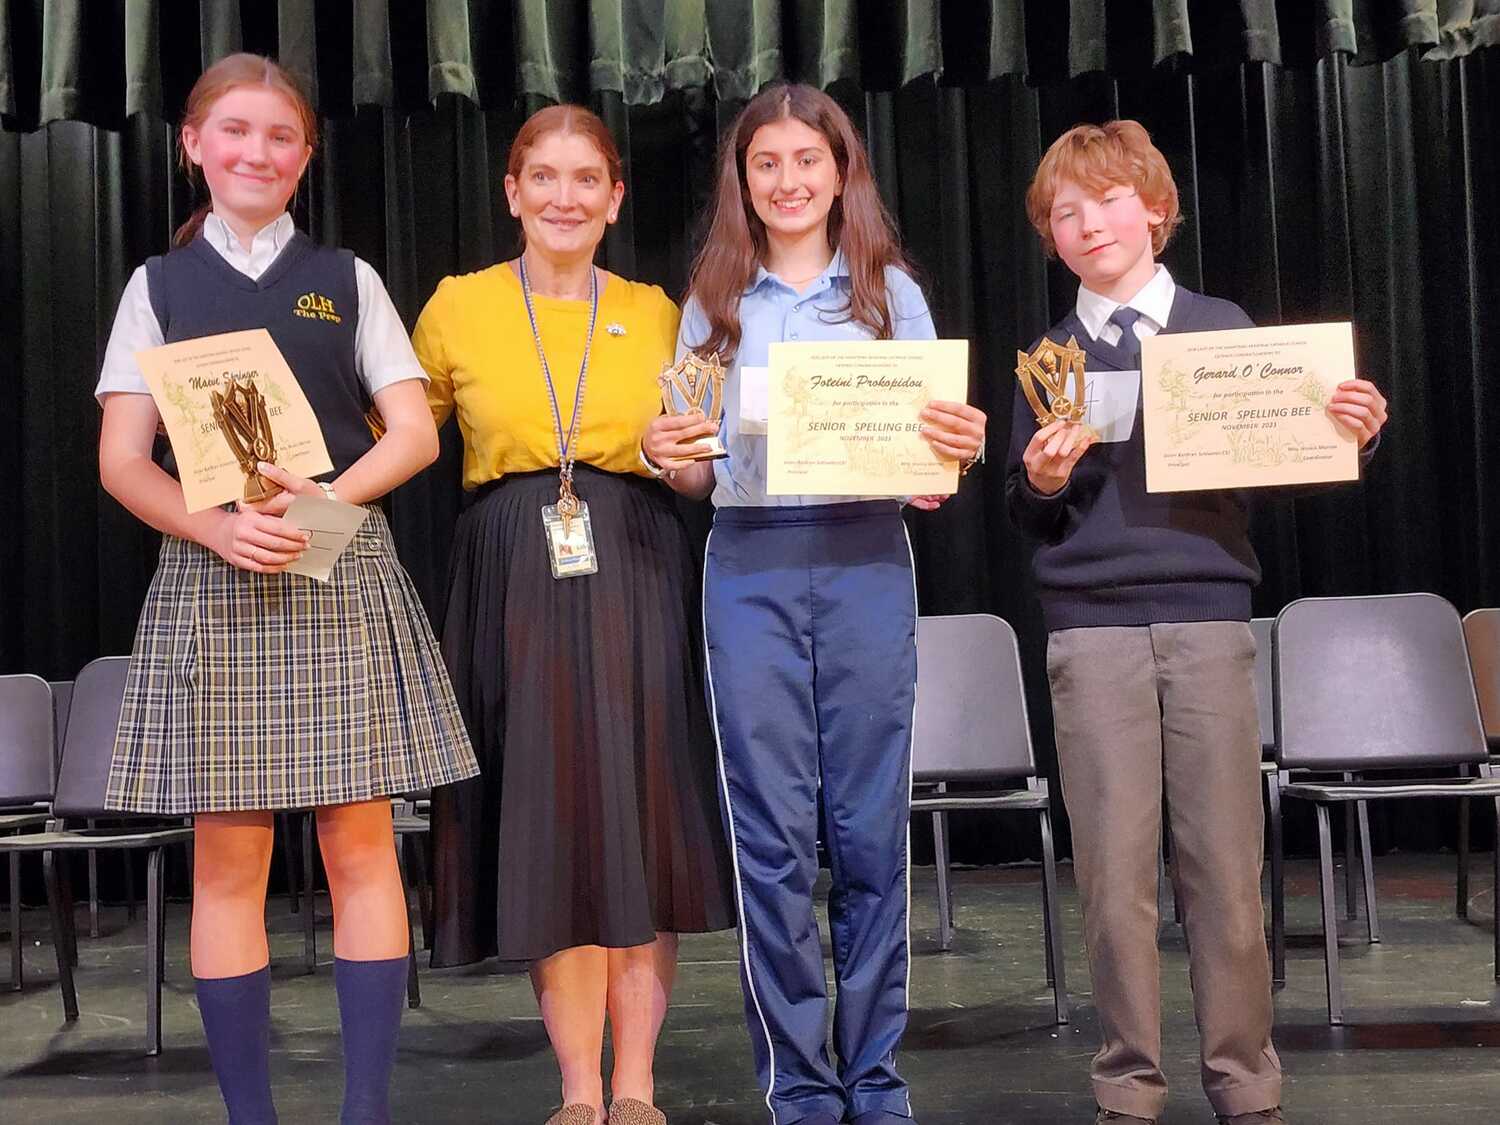 Our Lady of the Hamptons School's spelling bee winners, from lefit, Maeve Spring, third place; Foteini Prokopidou, first place; and Gerard o'Connor, second place, with bee coordinator Jessica Marron. COURTESY OUR LADY OF THE HAMPTONS SCHOOL